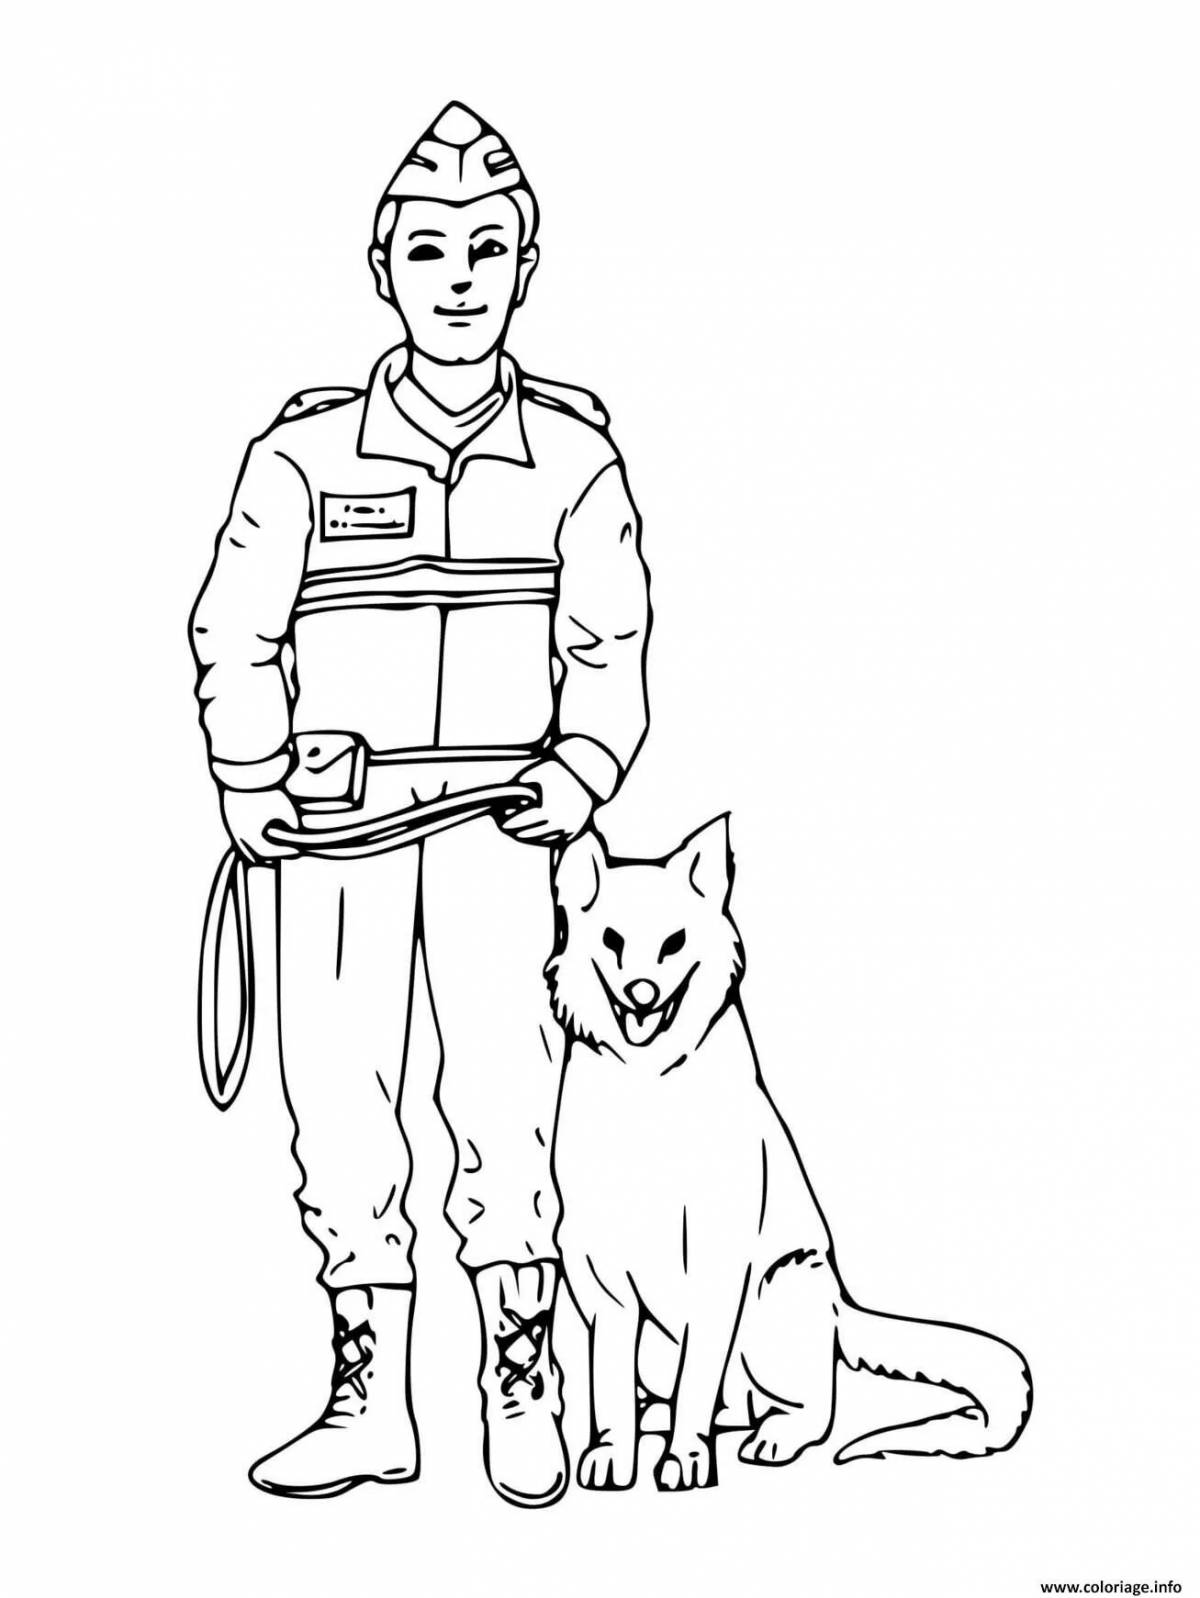 Great military profession coloring book for students